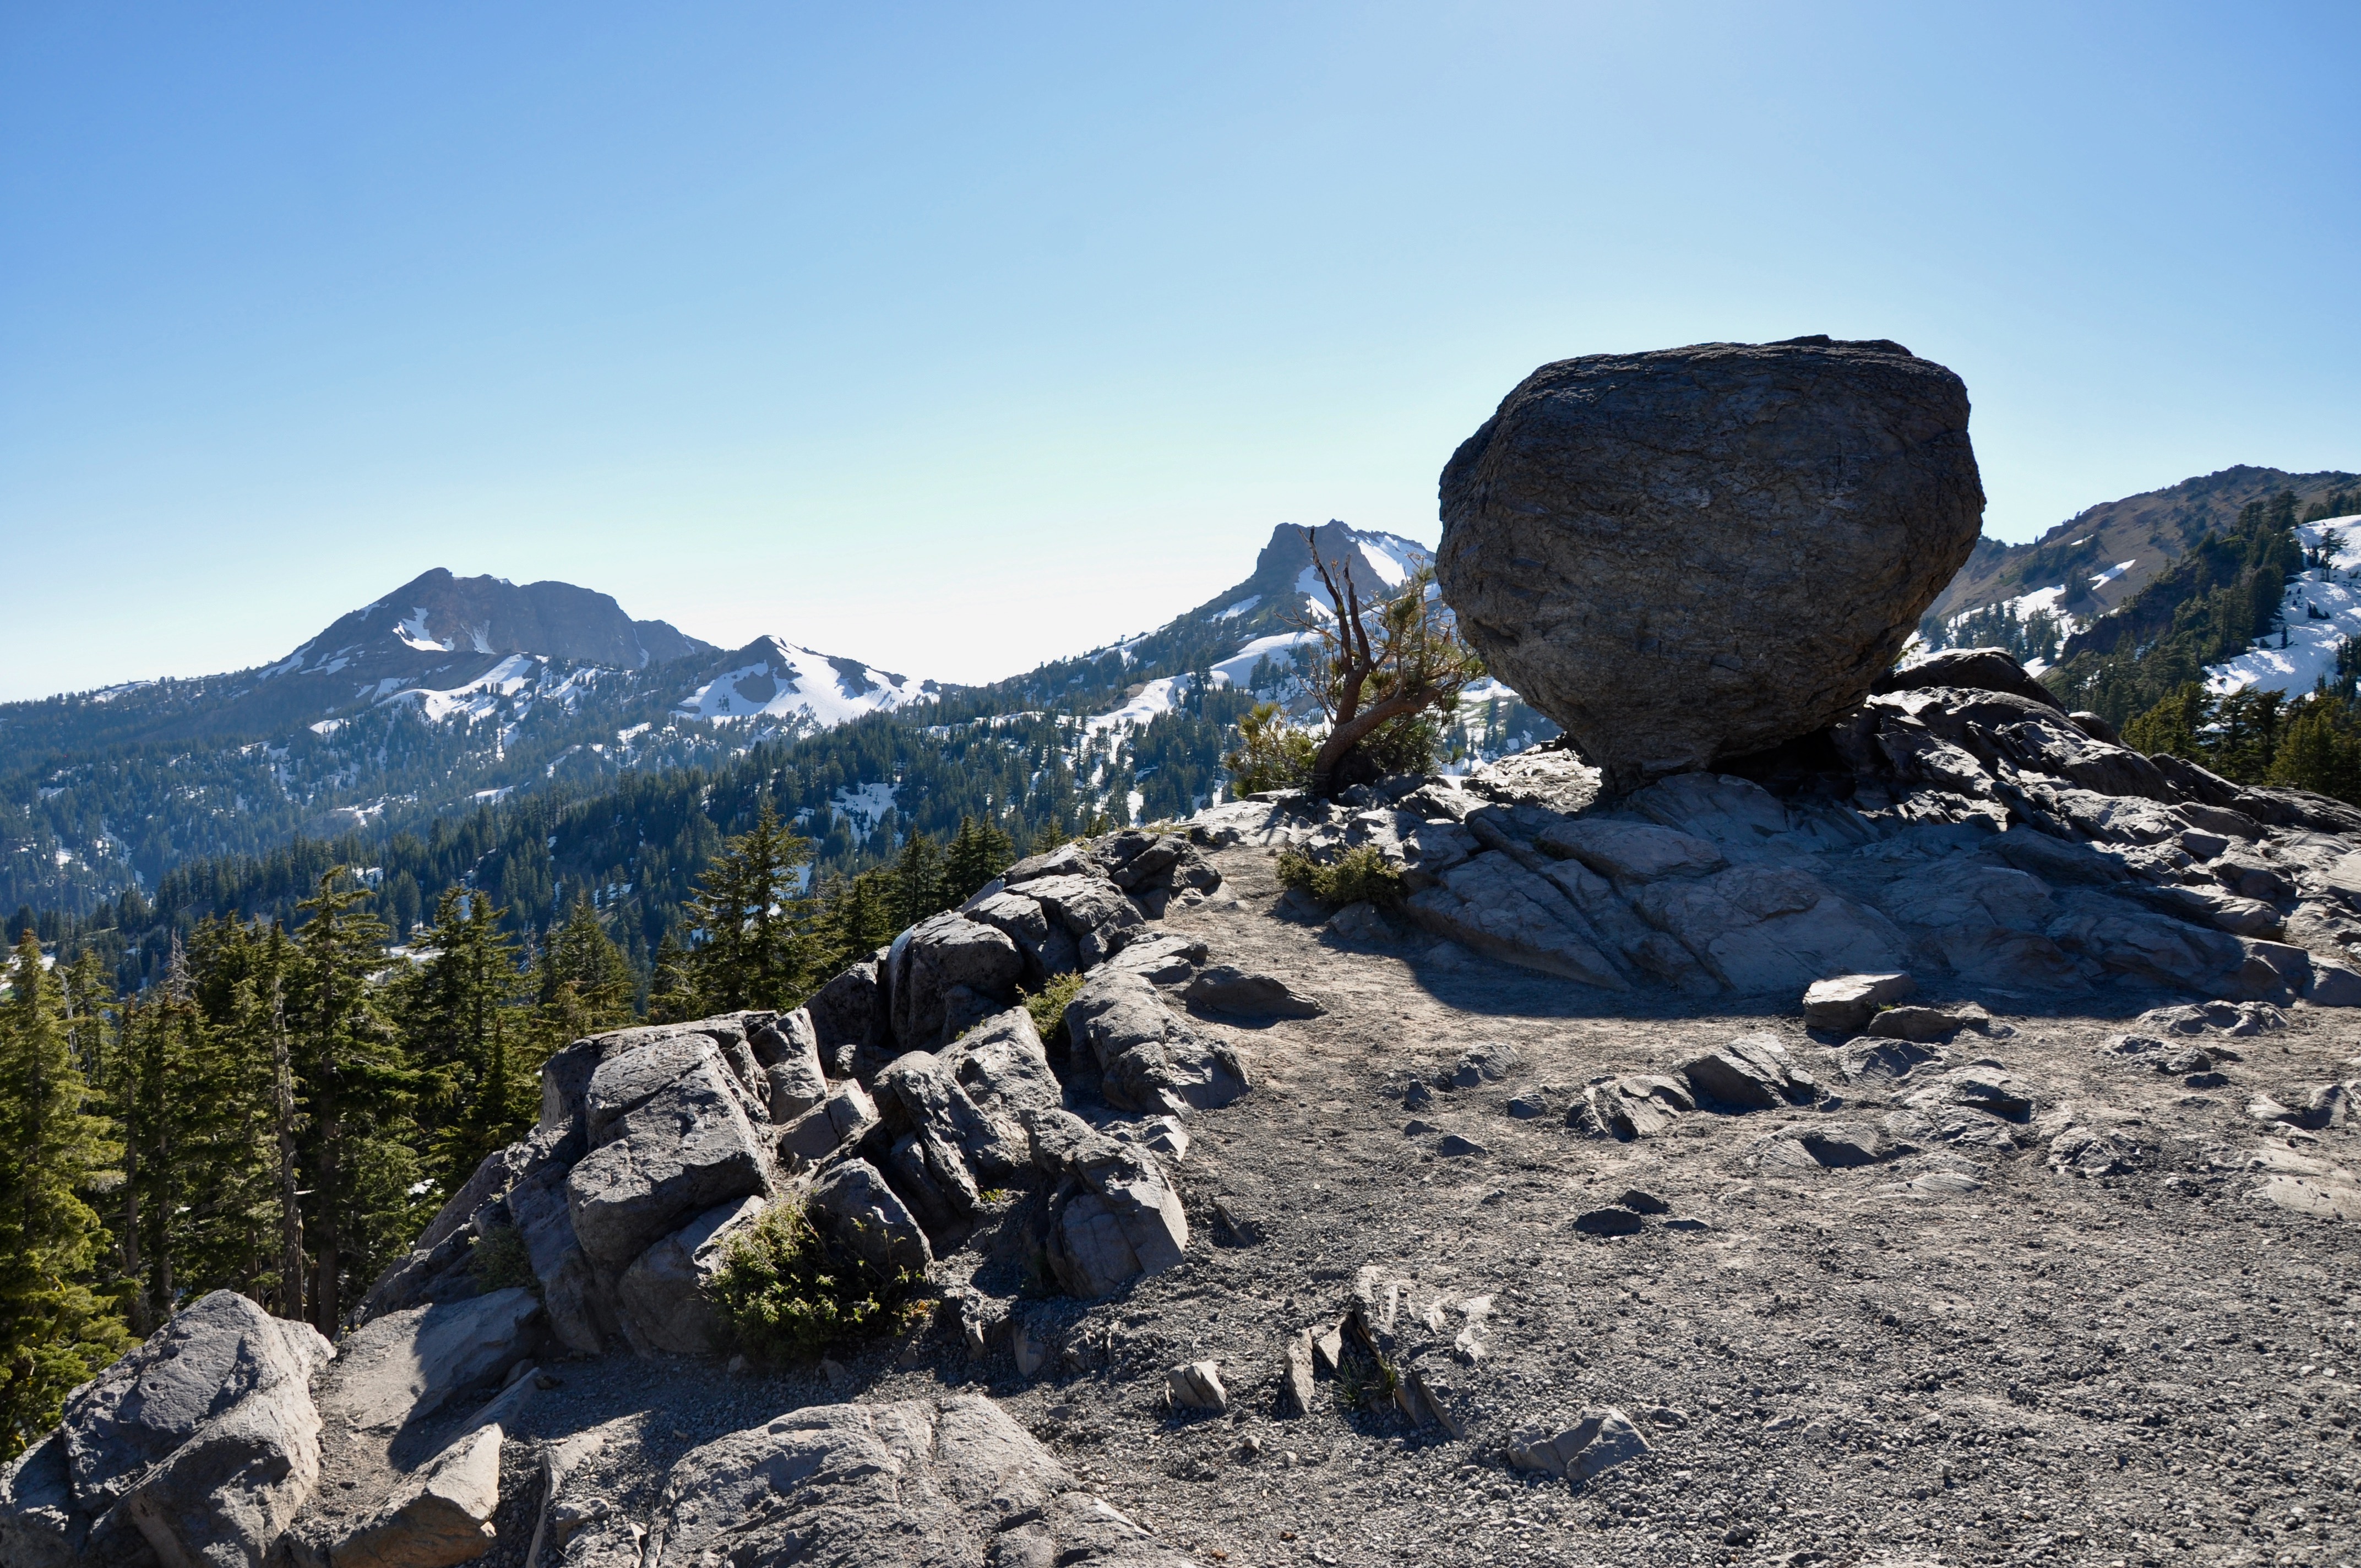 View from Mt. Lassen, a northern California volcano